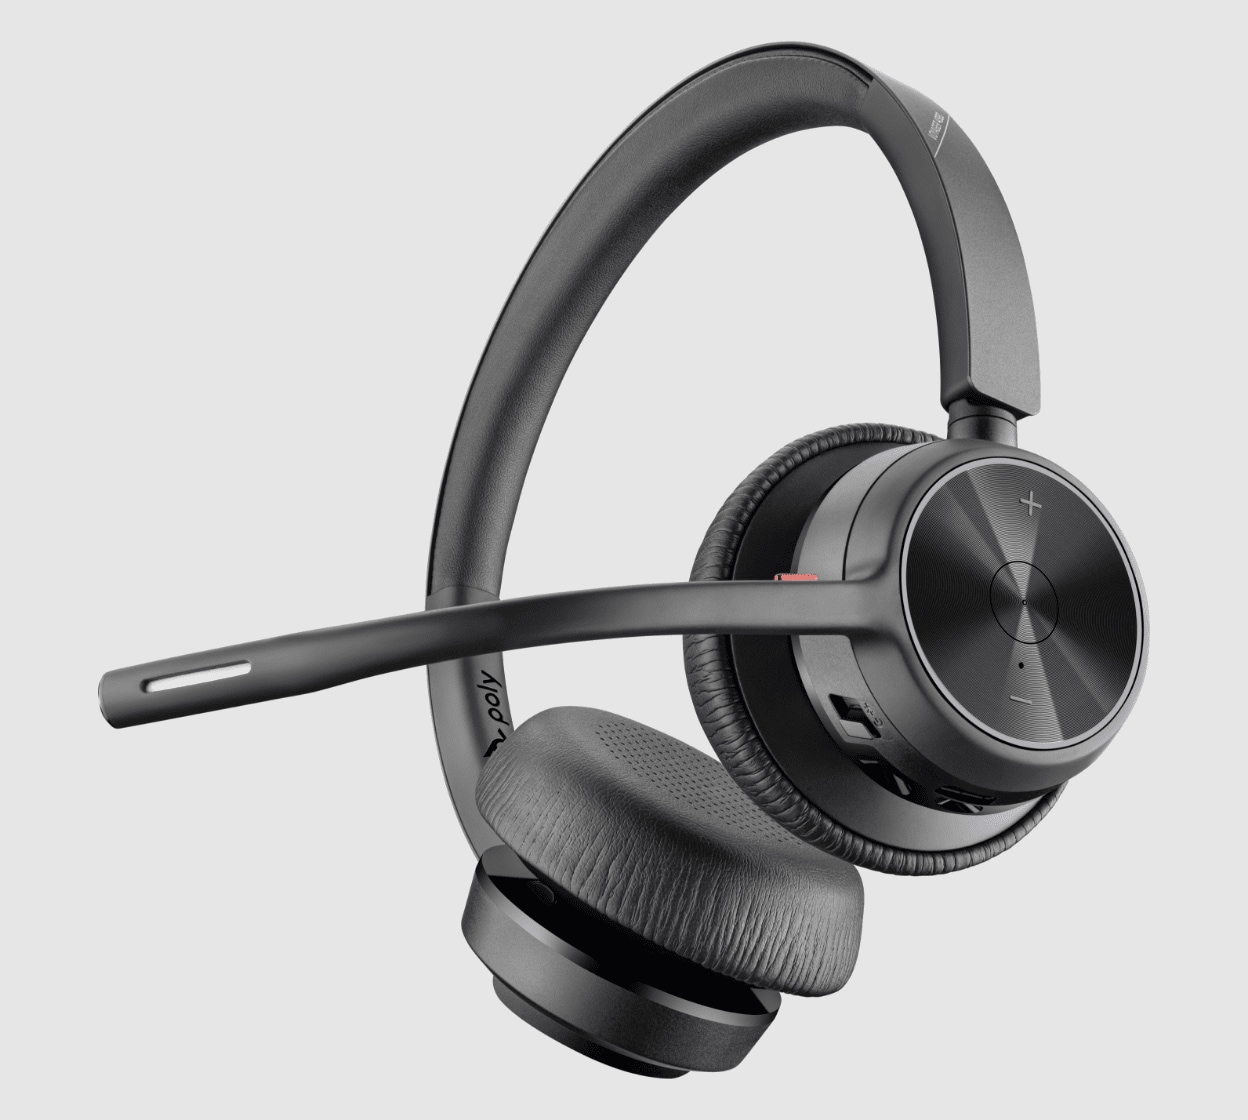 https://www.hp.com/content/dam/sites/worldwide/poly/headsets/bluetooth-headsets-and-earbuds/VCS%20-%20Desktop%20%E2%80%93%206@2x.png